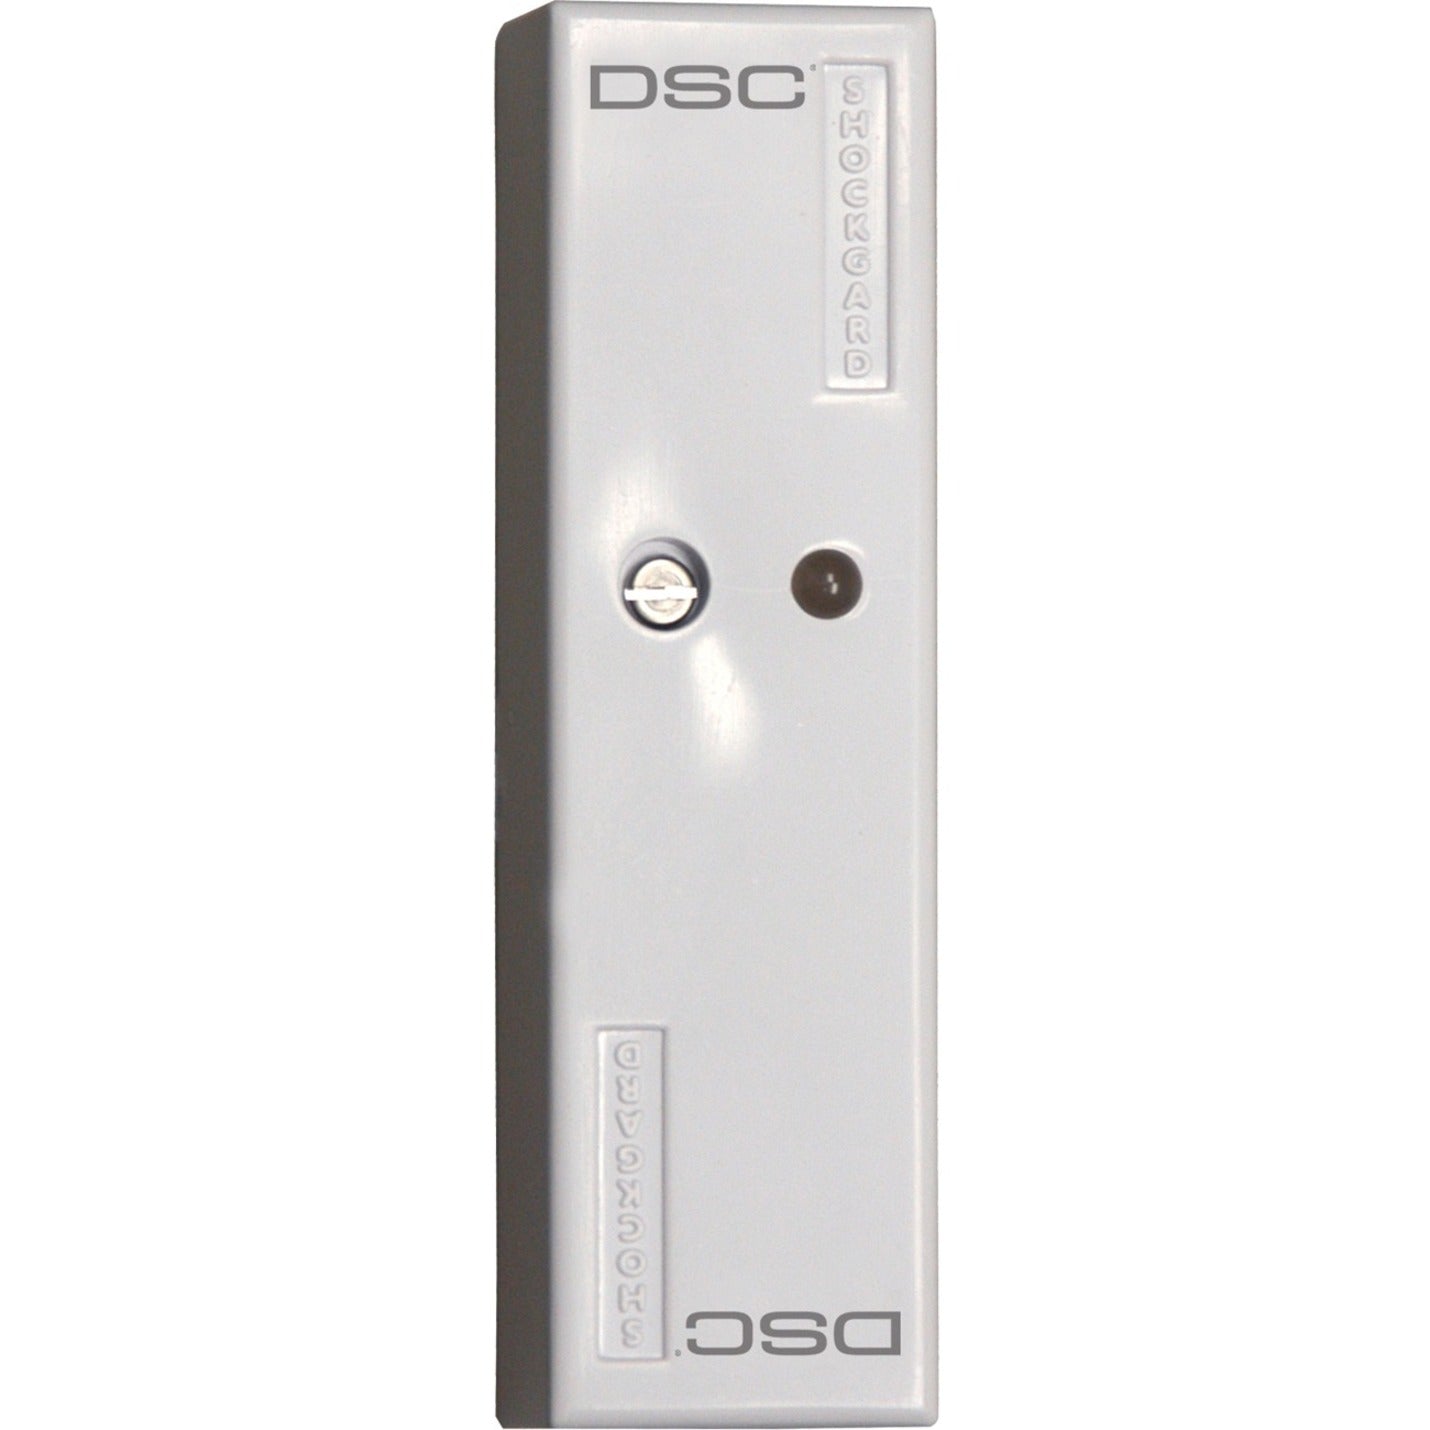 DSC SS-102 Shock Sensor, Vibration Monitoring for Residential and Commercial Use